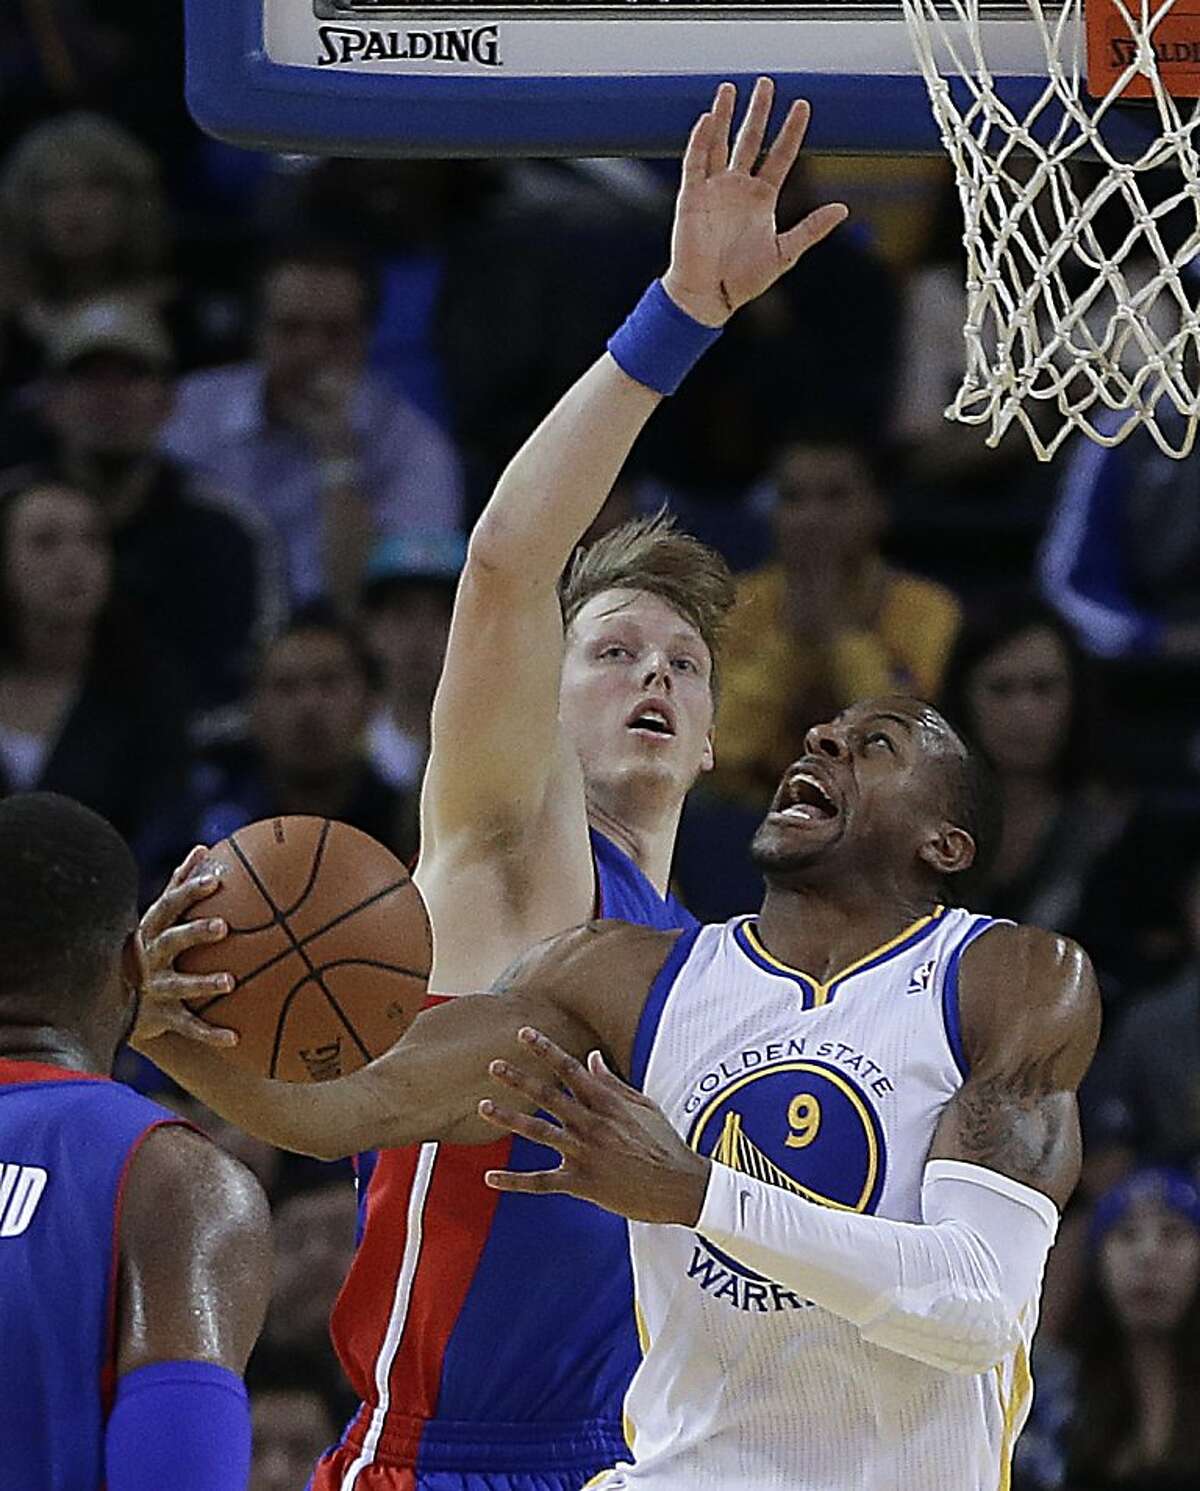 Golden State Warriors' Andre Iguodala (9) looks to shoot over Detroit Pistons' Kyle Singler during the first half of an NBA basketball game on Tuesday, Nov. 12, 2013, in Oakland, Calif. (AP Photo/Ben Margot)